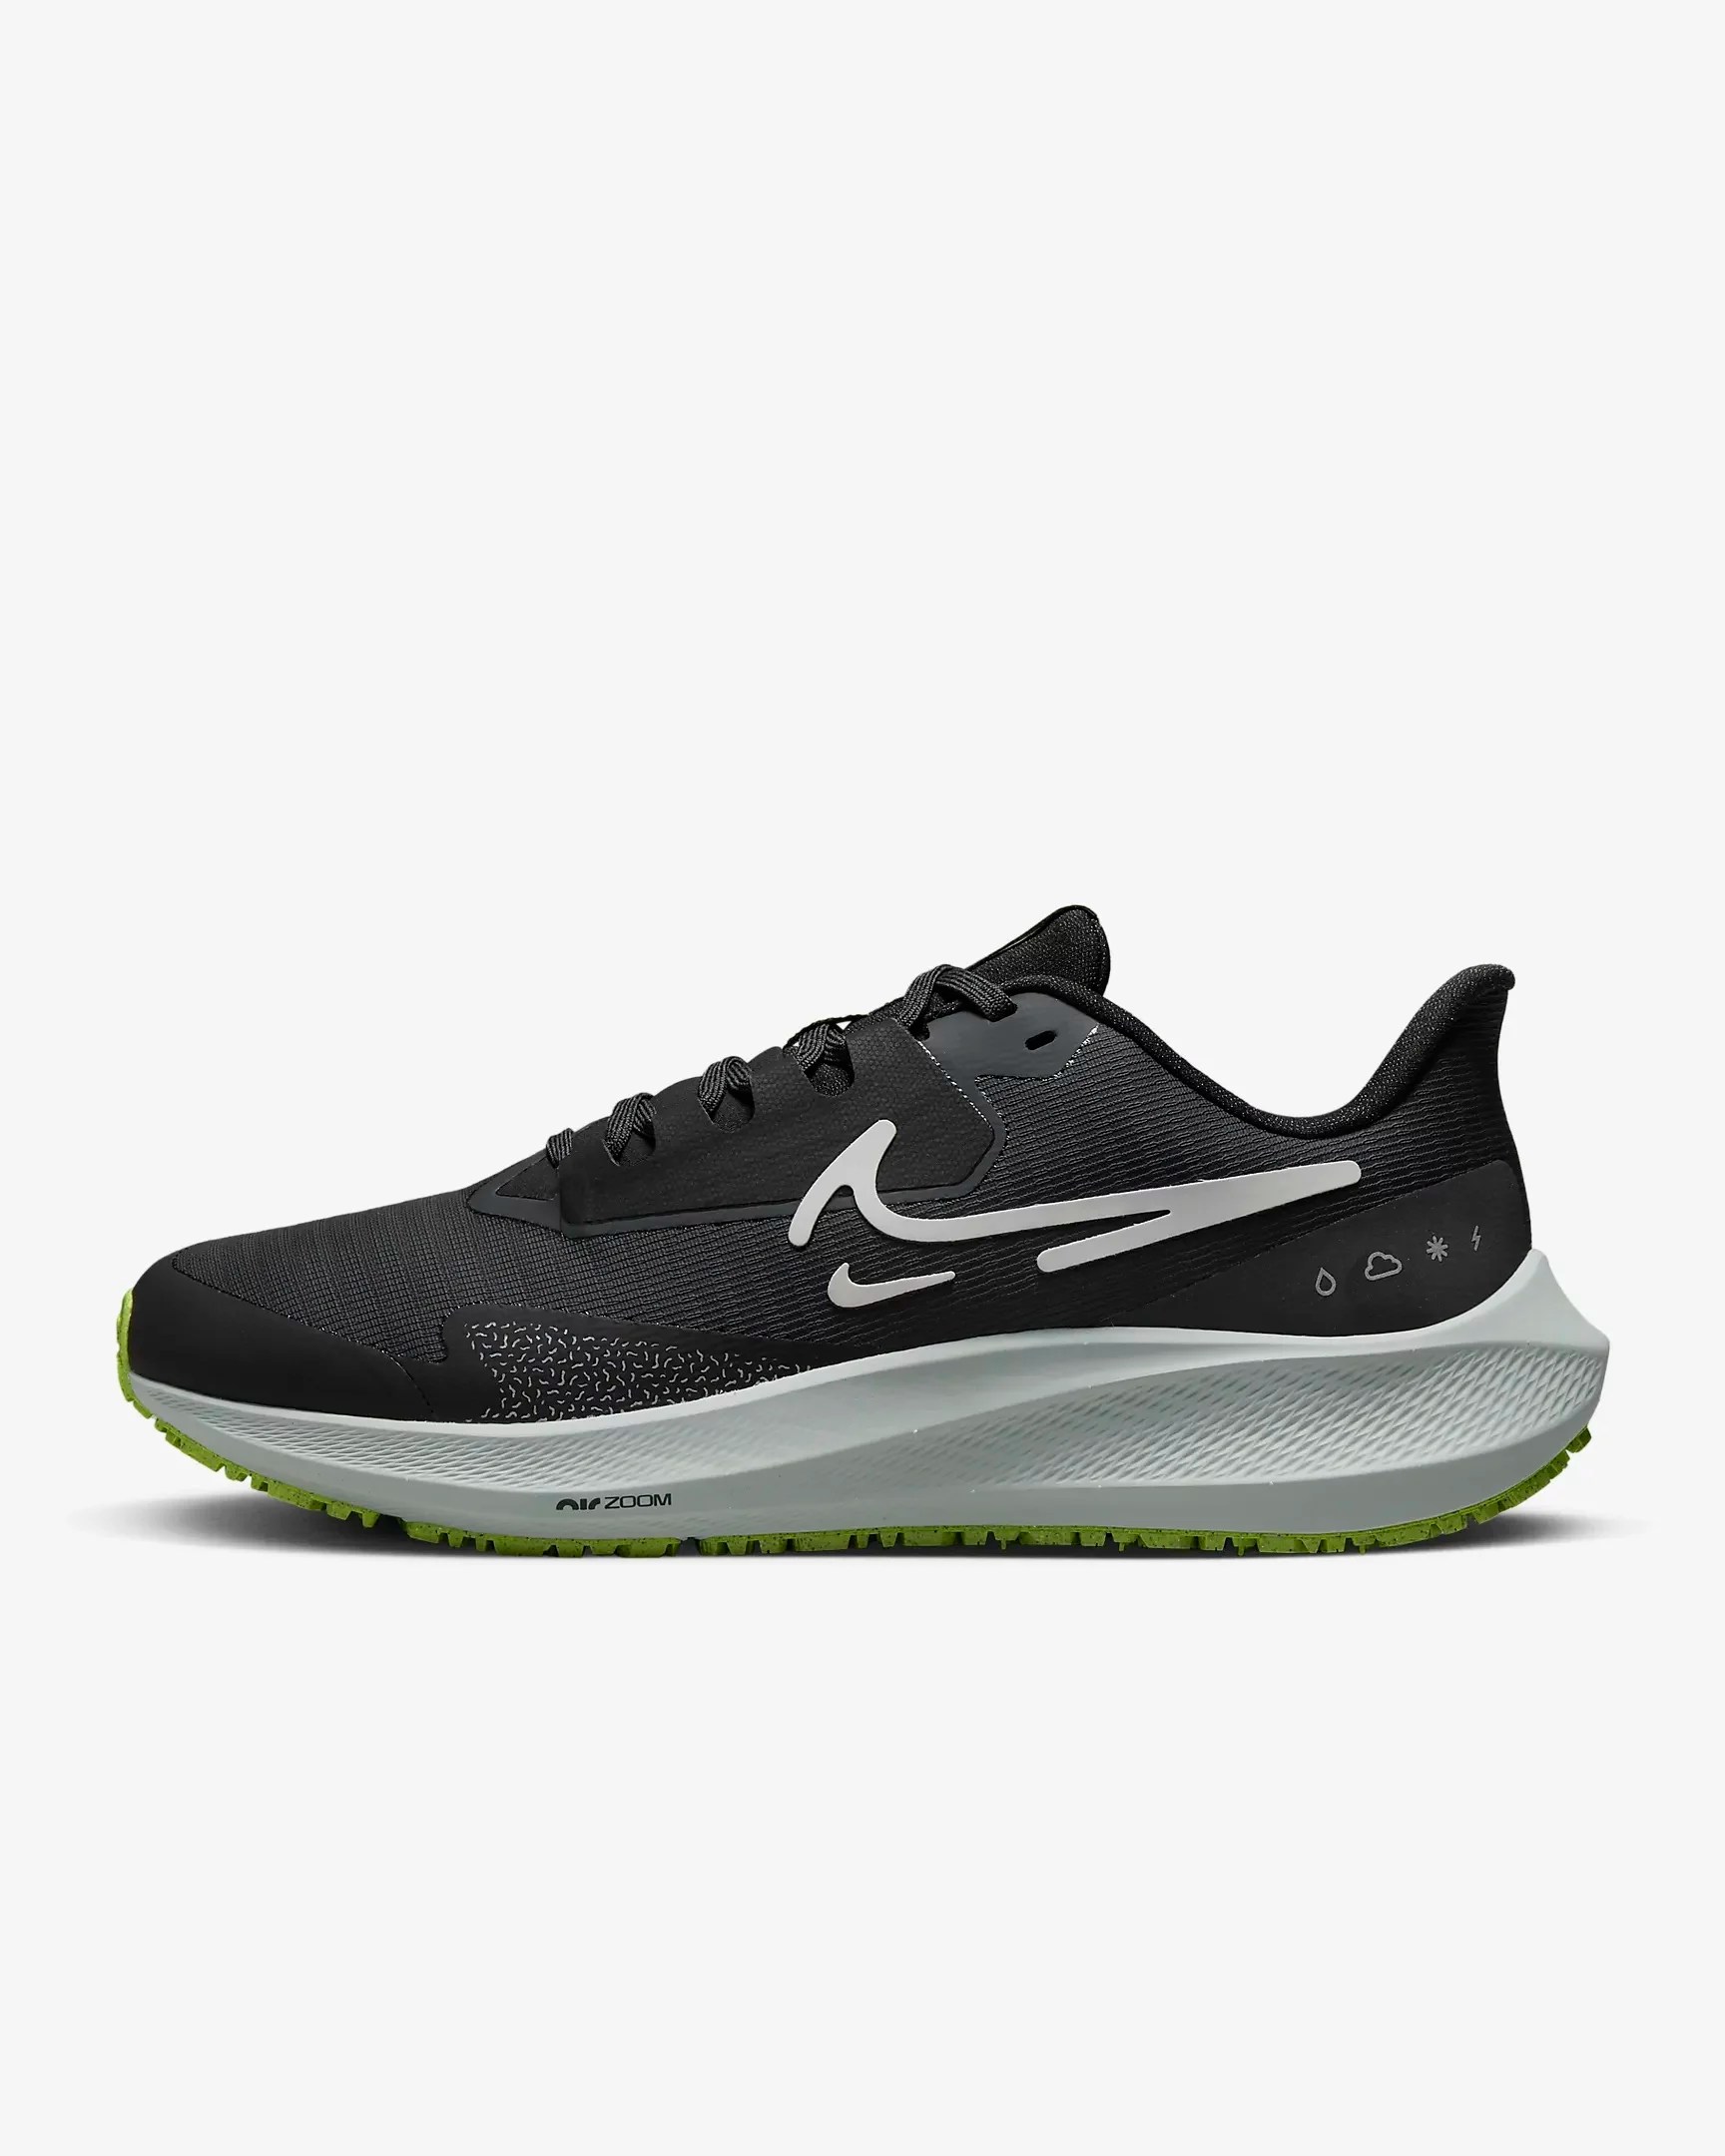 nike pegasus shield, best sneakers for ankle support